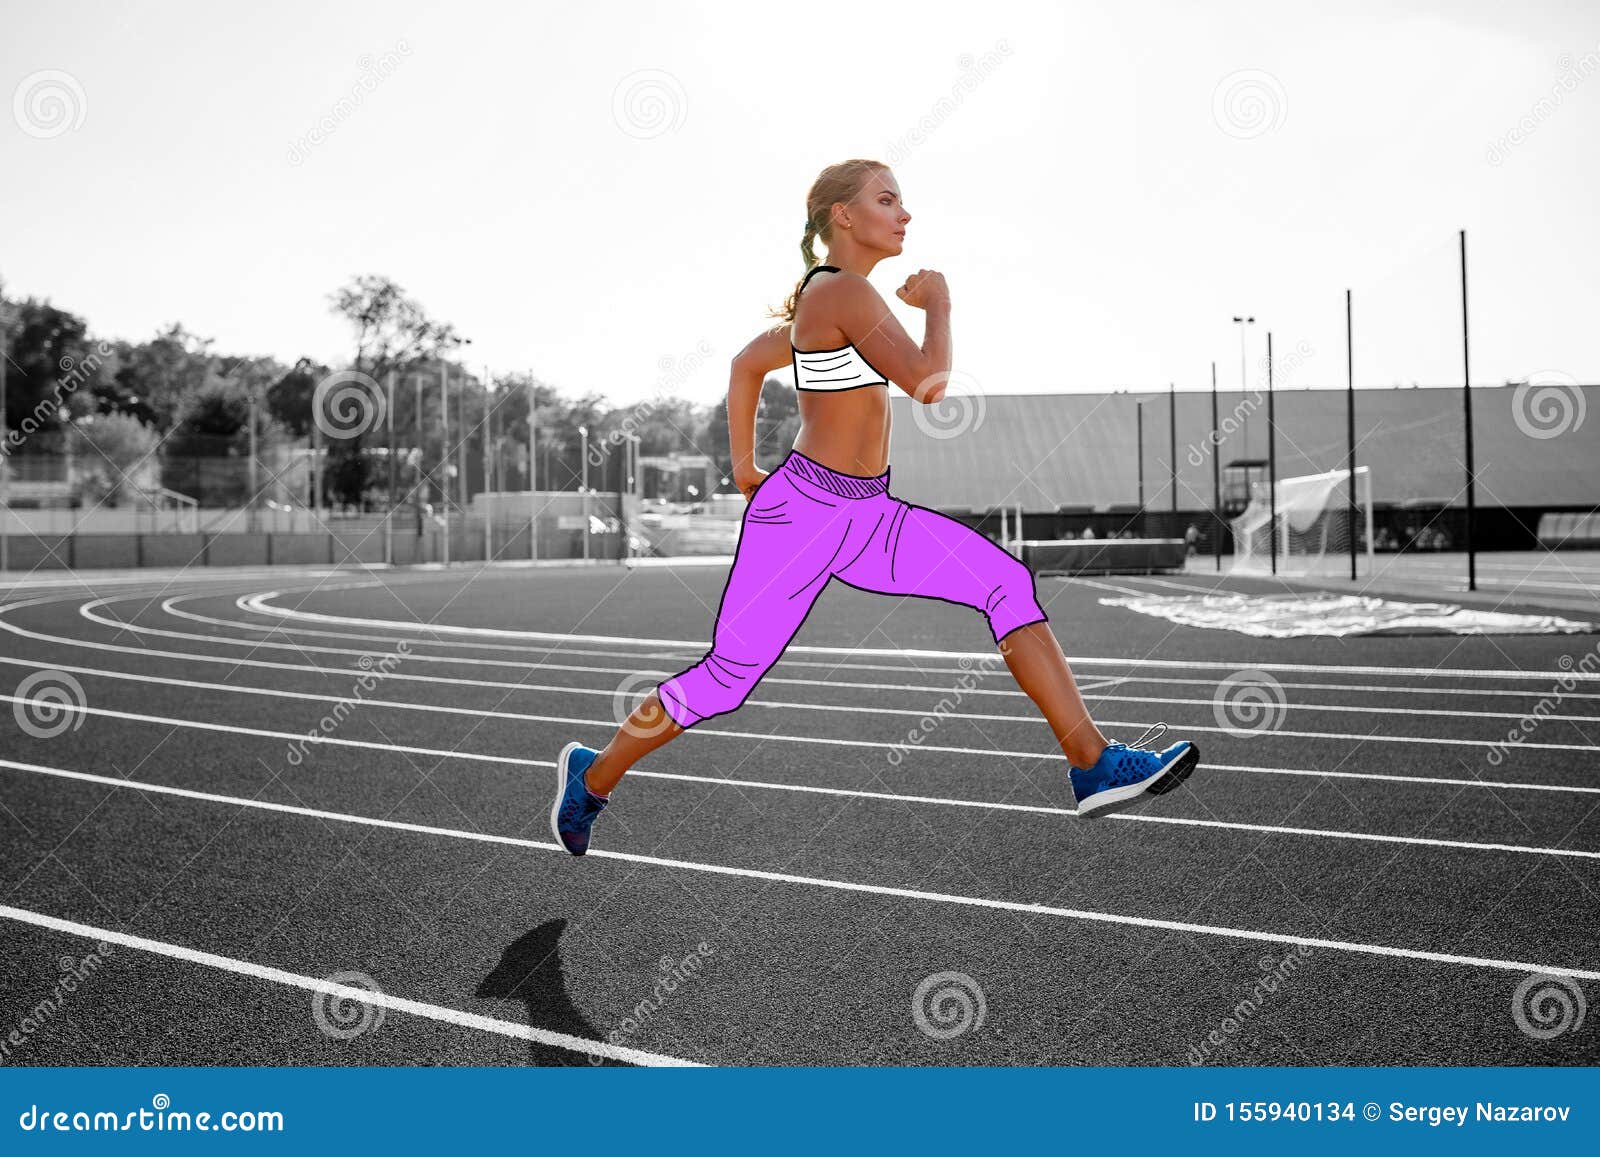 Woman Athlete in a Cartoon Sport Clothes is Running by the Track of a  Professional Stadium. Stock Illustration - Illustration of athlete,  competition: 155940134